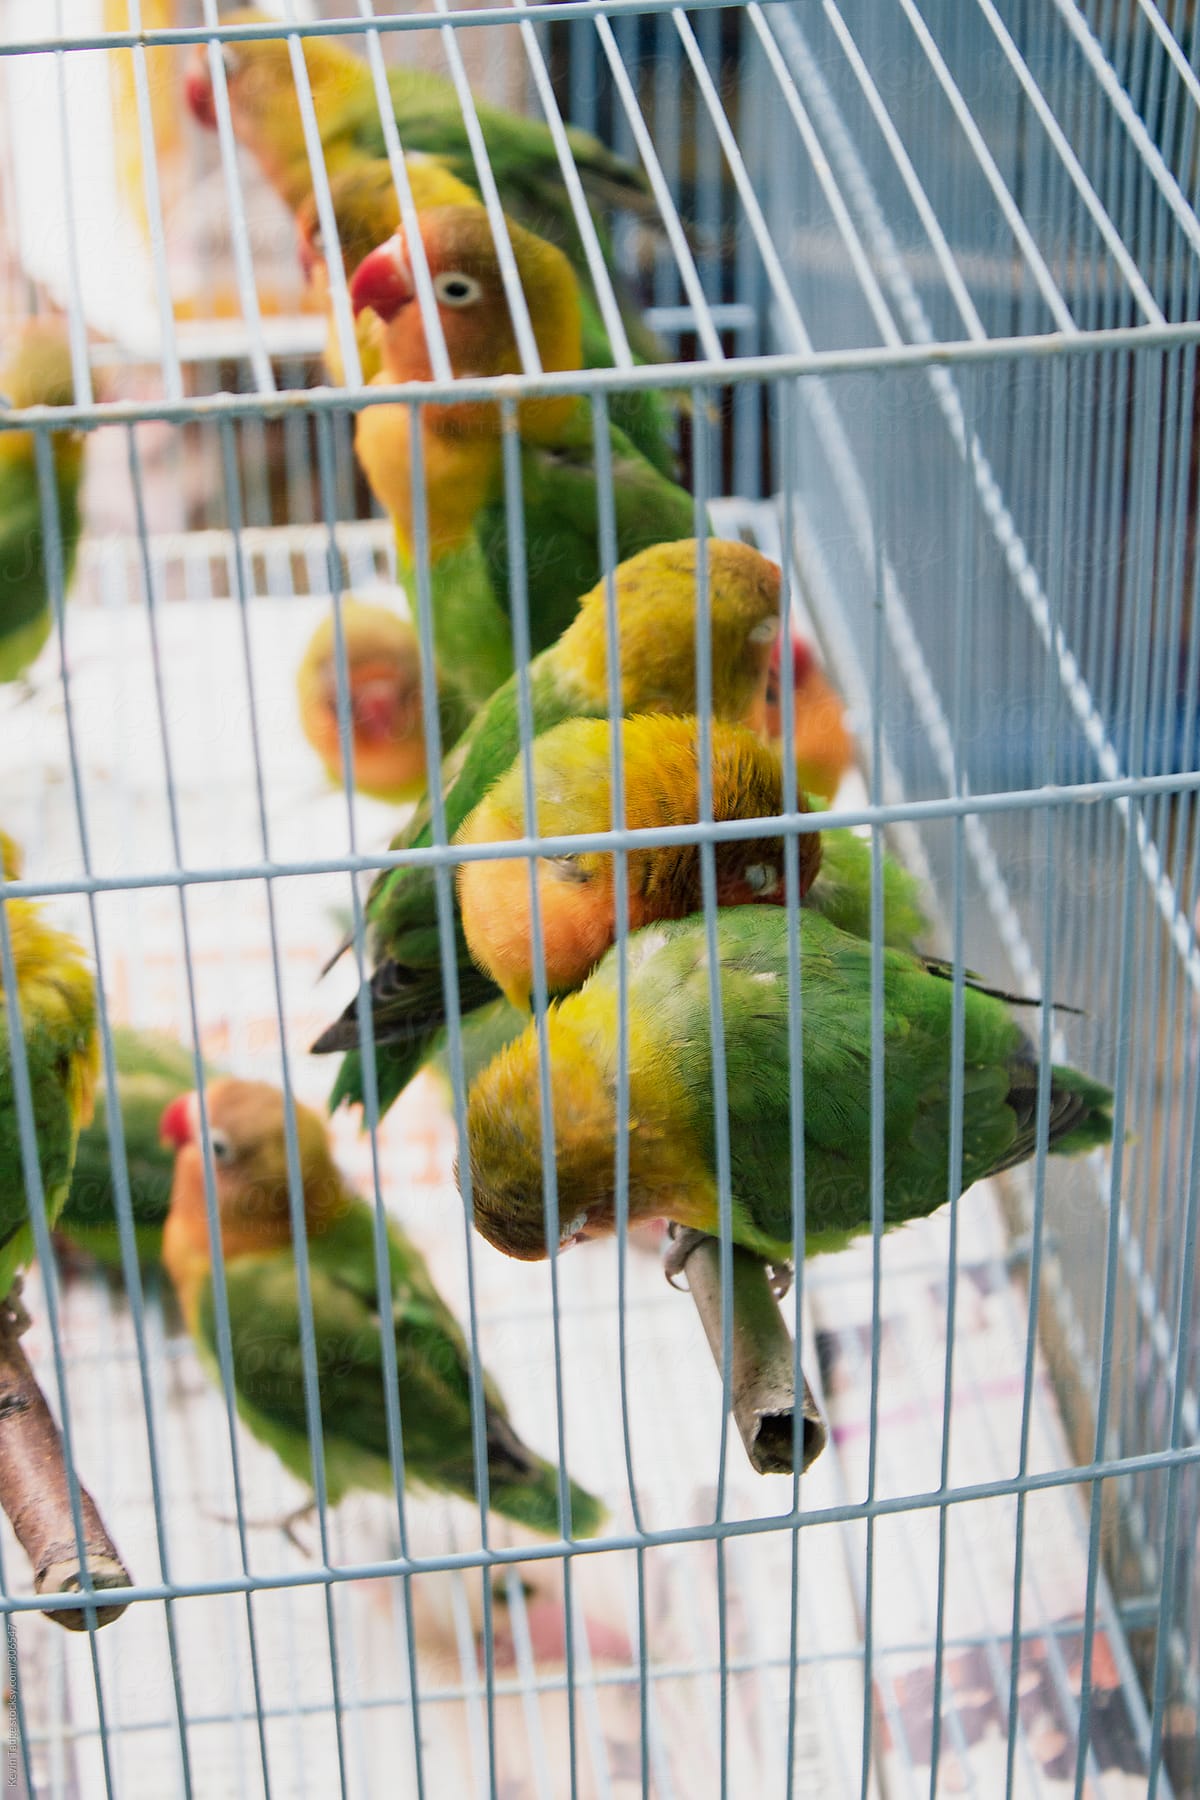 Caged Birds in a Market in Hong Kong